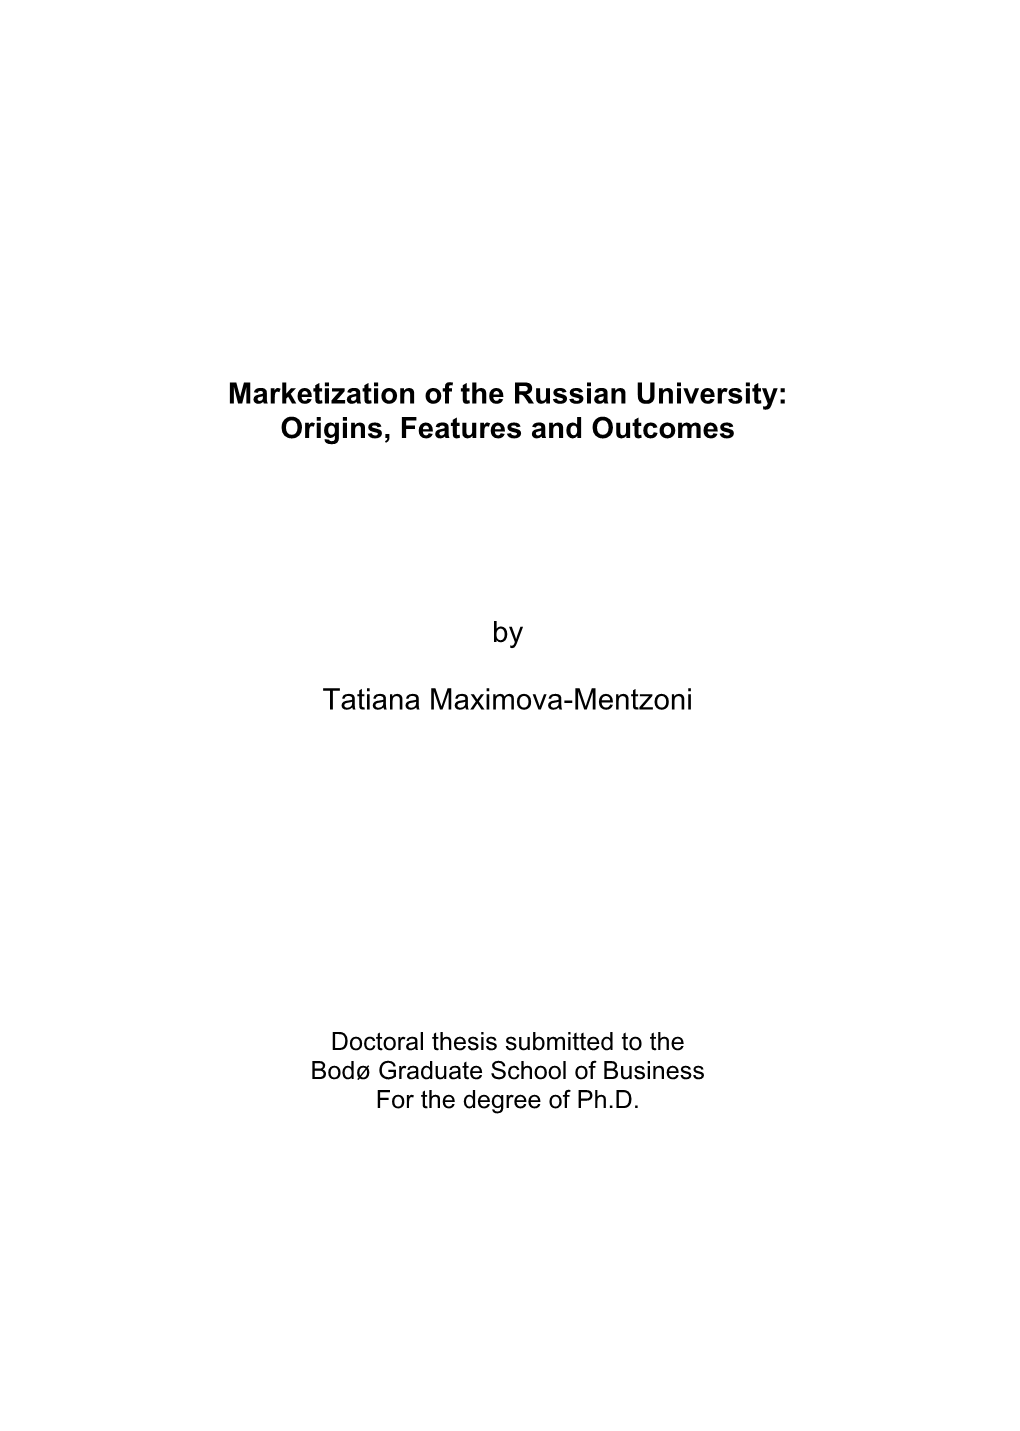 Marketization of the Russian University: Origins, Features and Outcomes